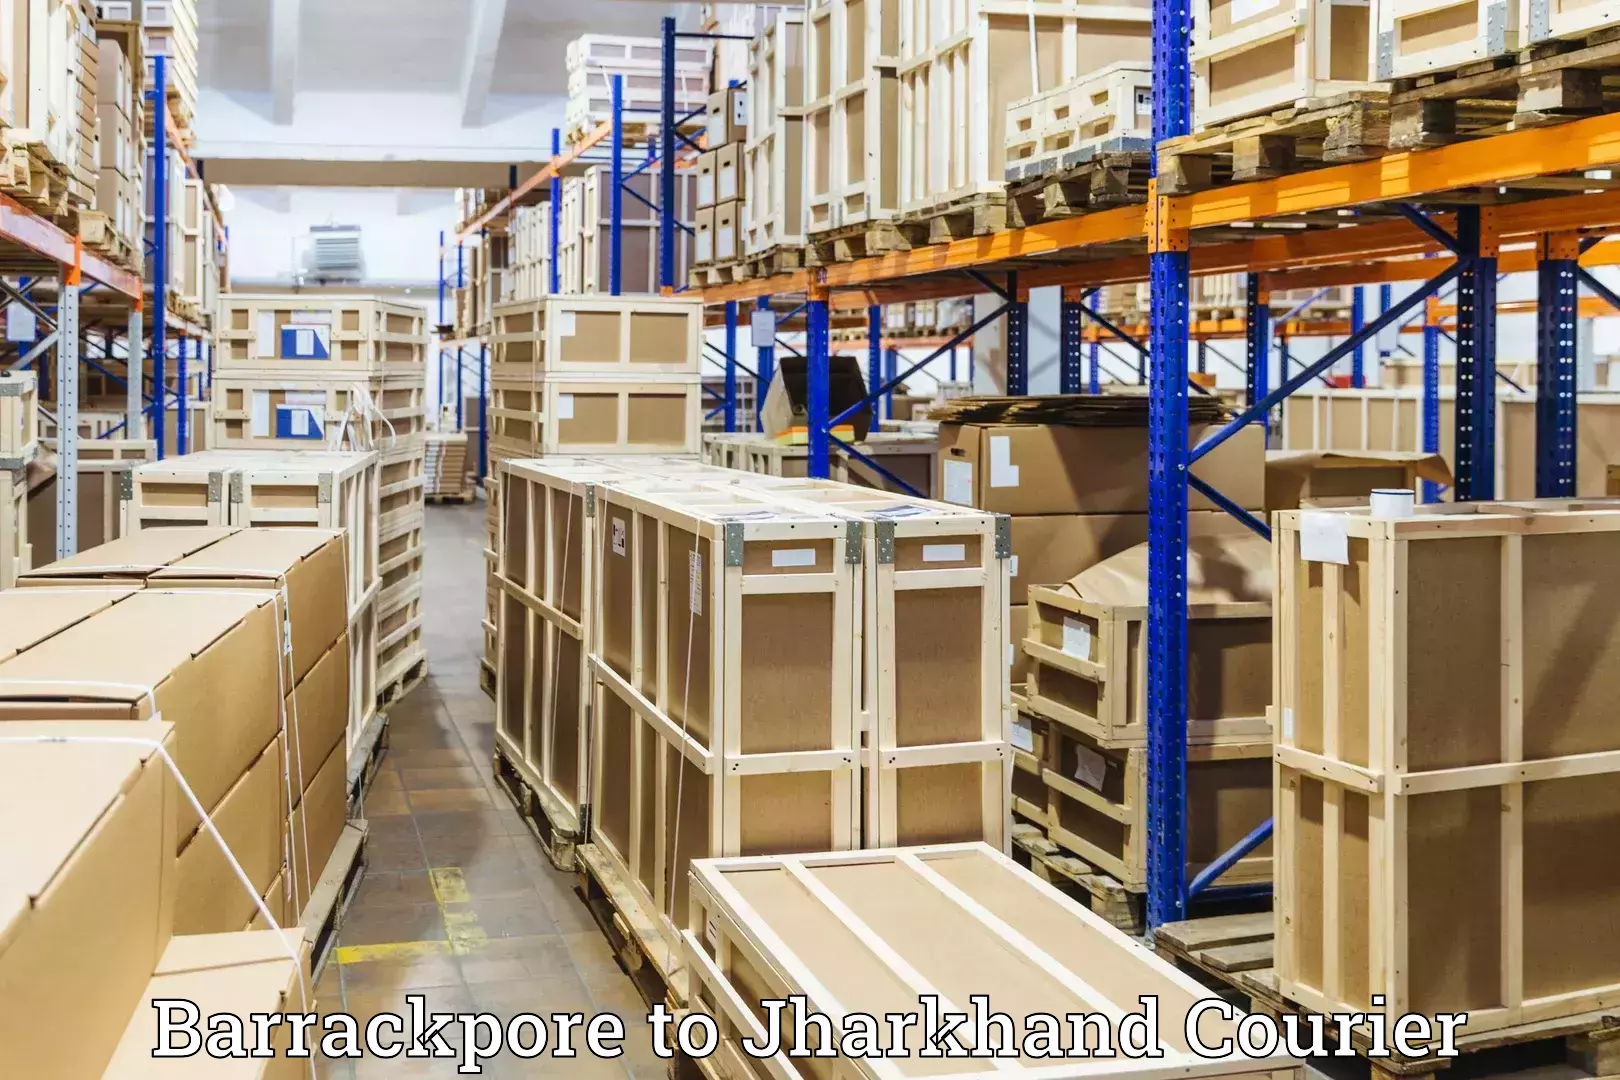 Luggage shipping specialists Barrackpore to Isri